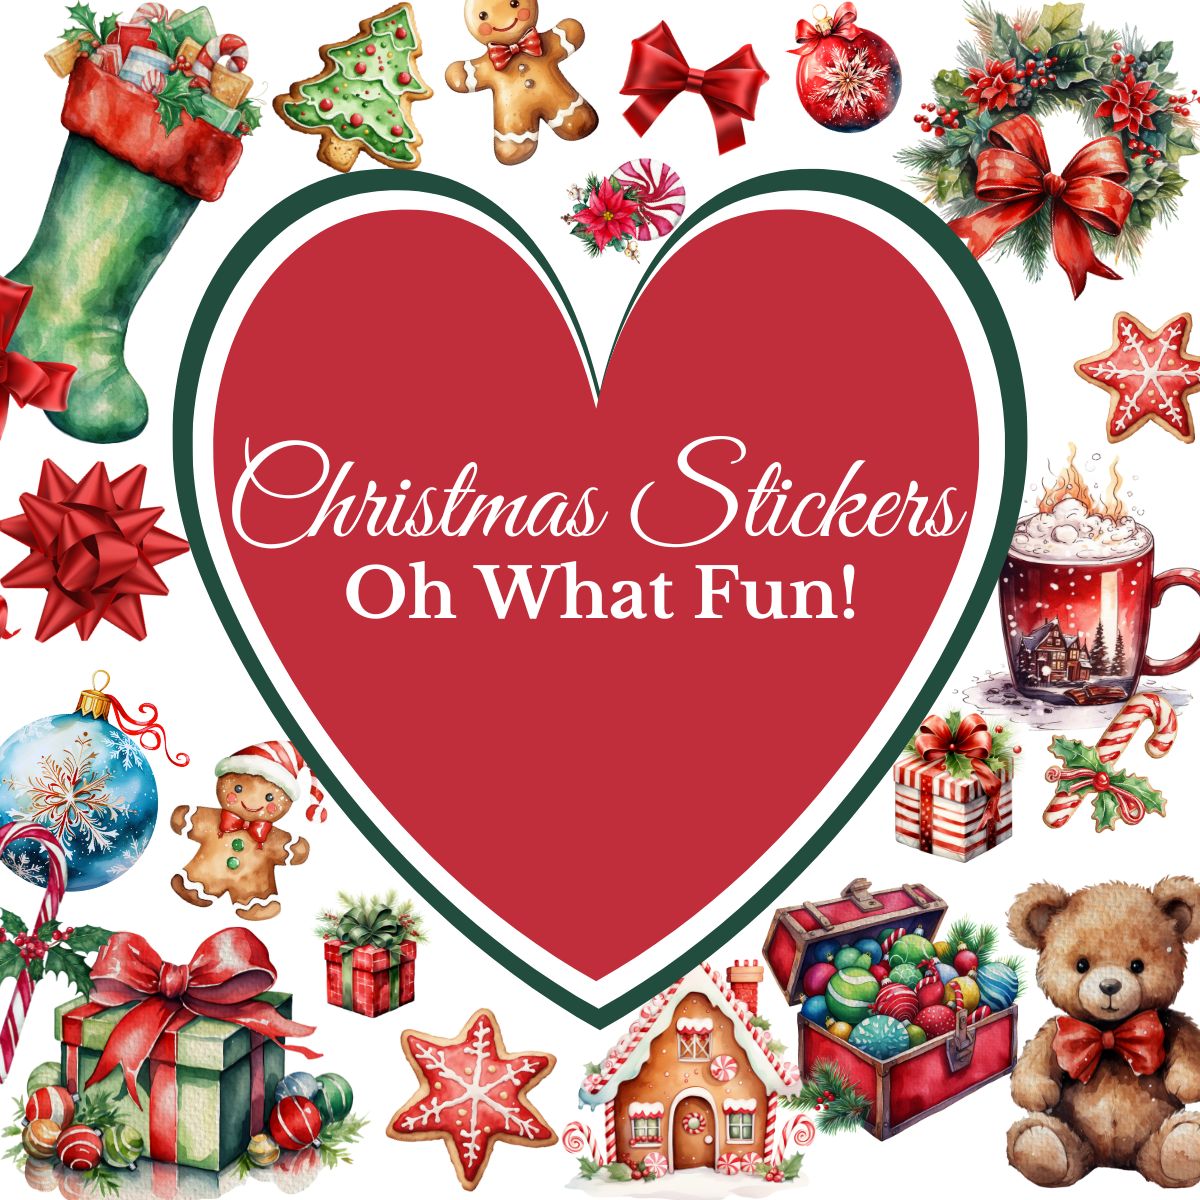 Oh What Fun! Christmas Stickers